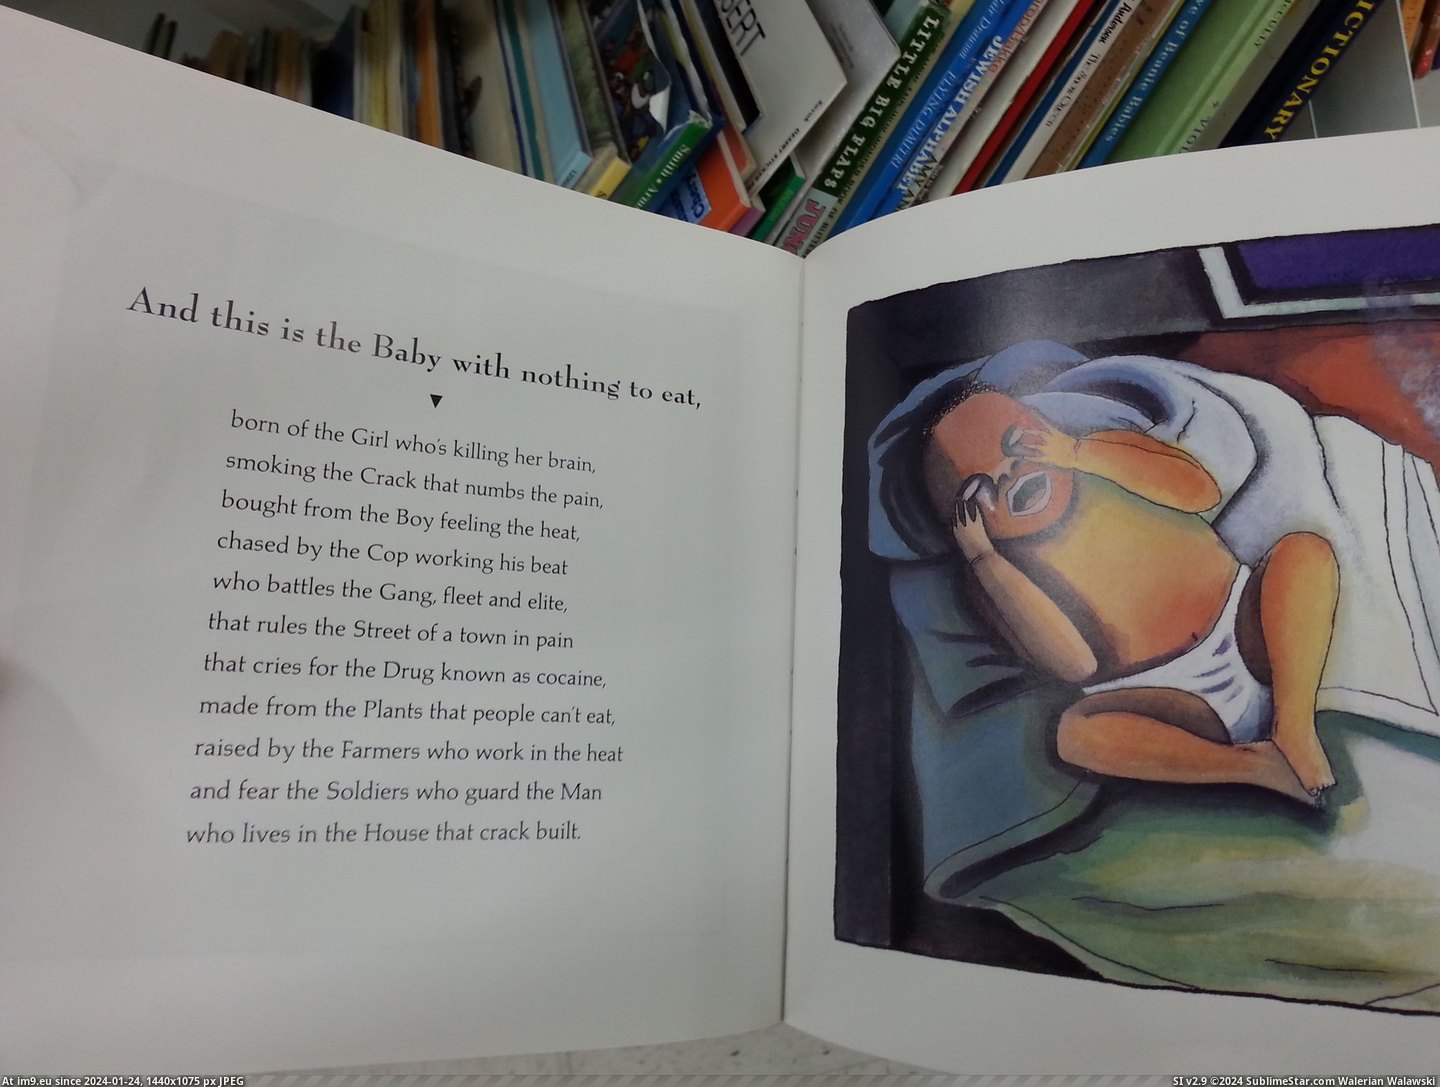 #Wtf #Store #Thrift #Crack #Book #Children [Wtf] Found this children's book about crack at a thrift store today 1 Pic. (Image of album My r/WTF favs))